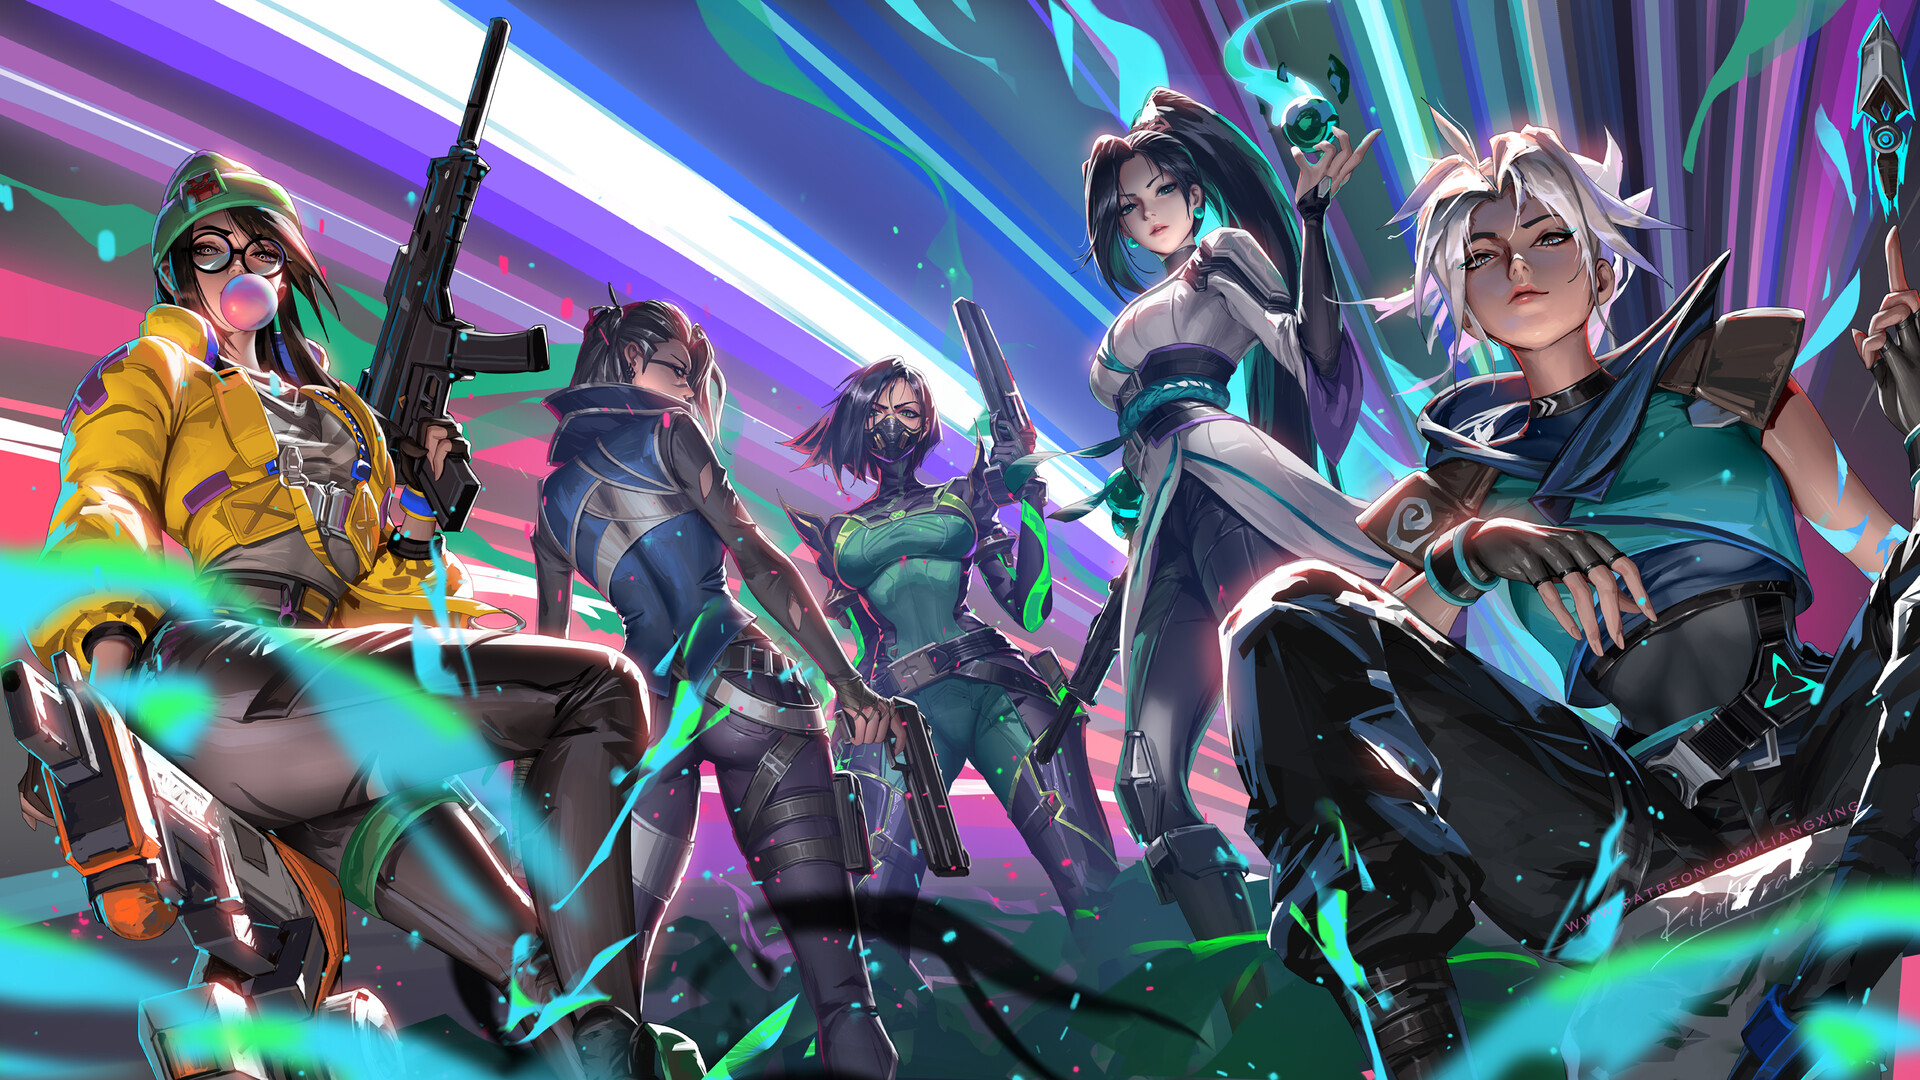 General 1920x1080 Jason Liang Valorant group of women digital art artwork illustration video game girls fan art video game characters video games long hair white hair girls with guns colorful yellow jacket looking at viewer dark hair Killjoy (Valorant) weapon Viper (Valorant) earring Sage (valorant) mask Jett (Valorant) standing Fade (Valorant) drawing bubble gum gloves fingerless gloves glasses women with glasses jacket